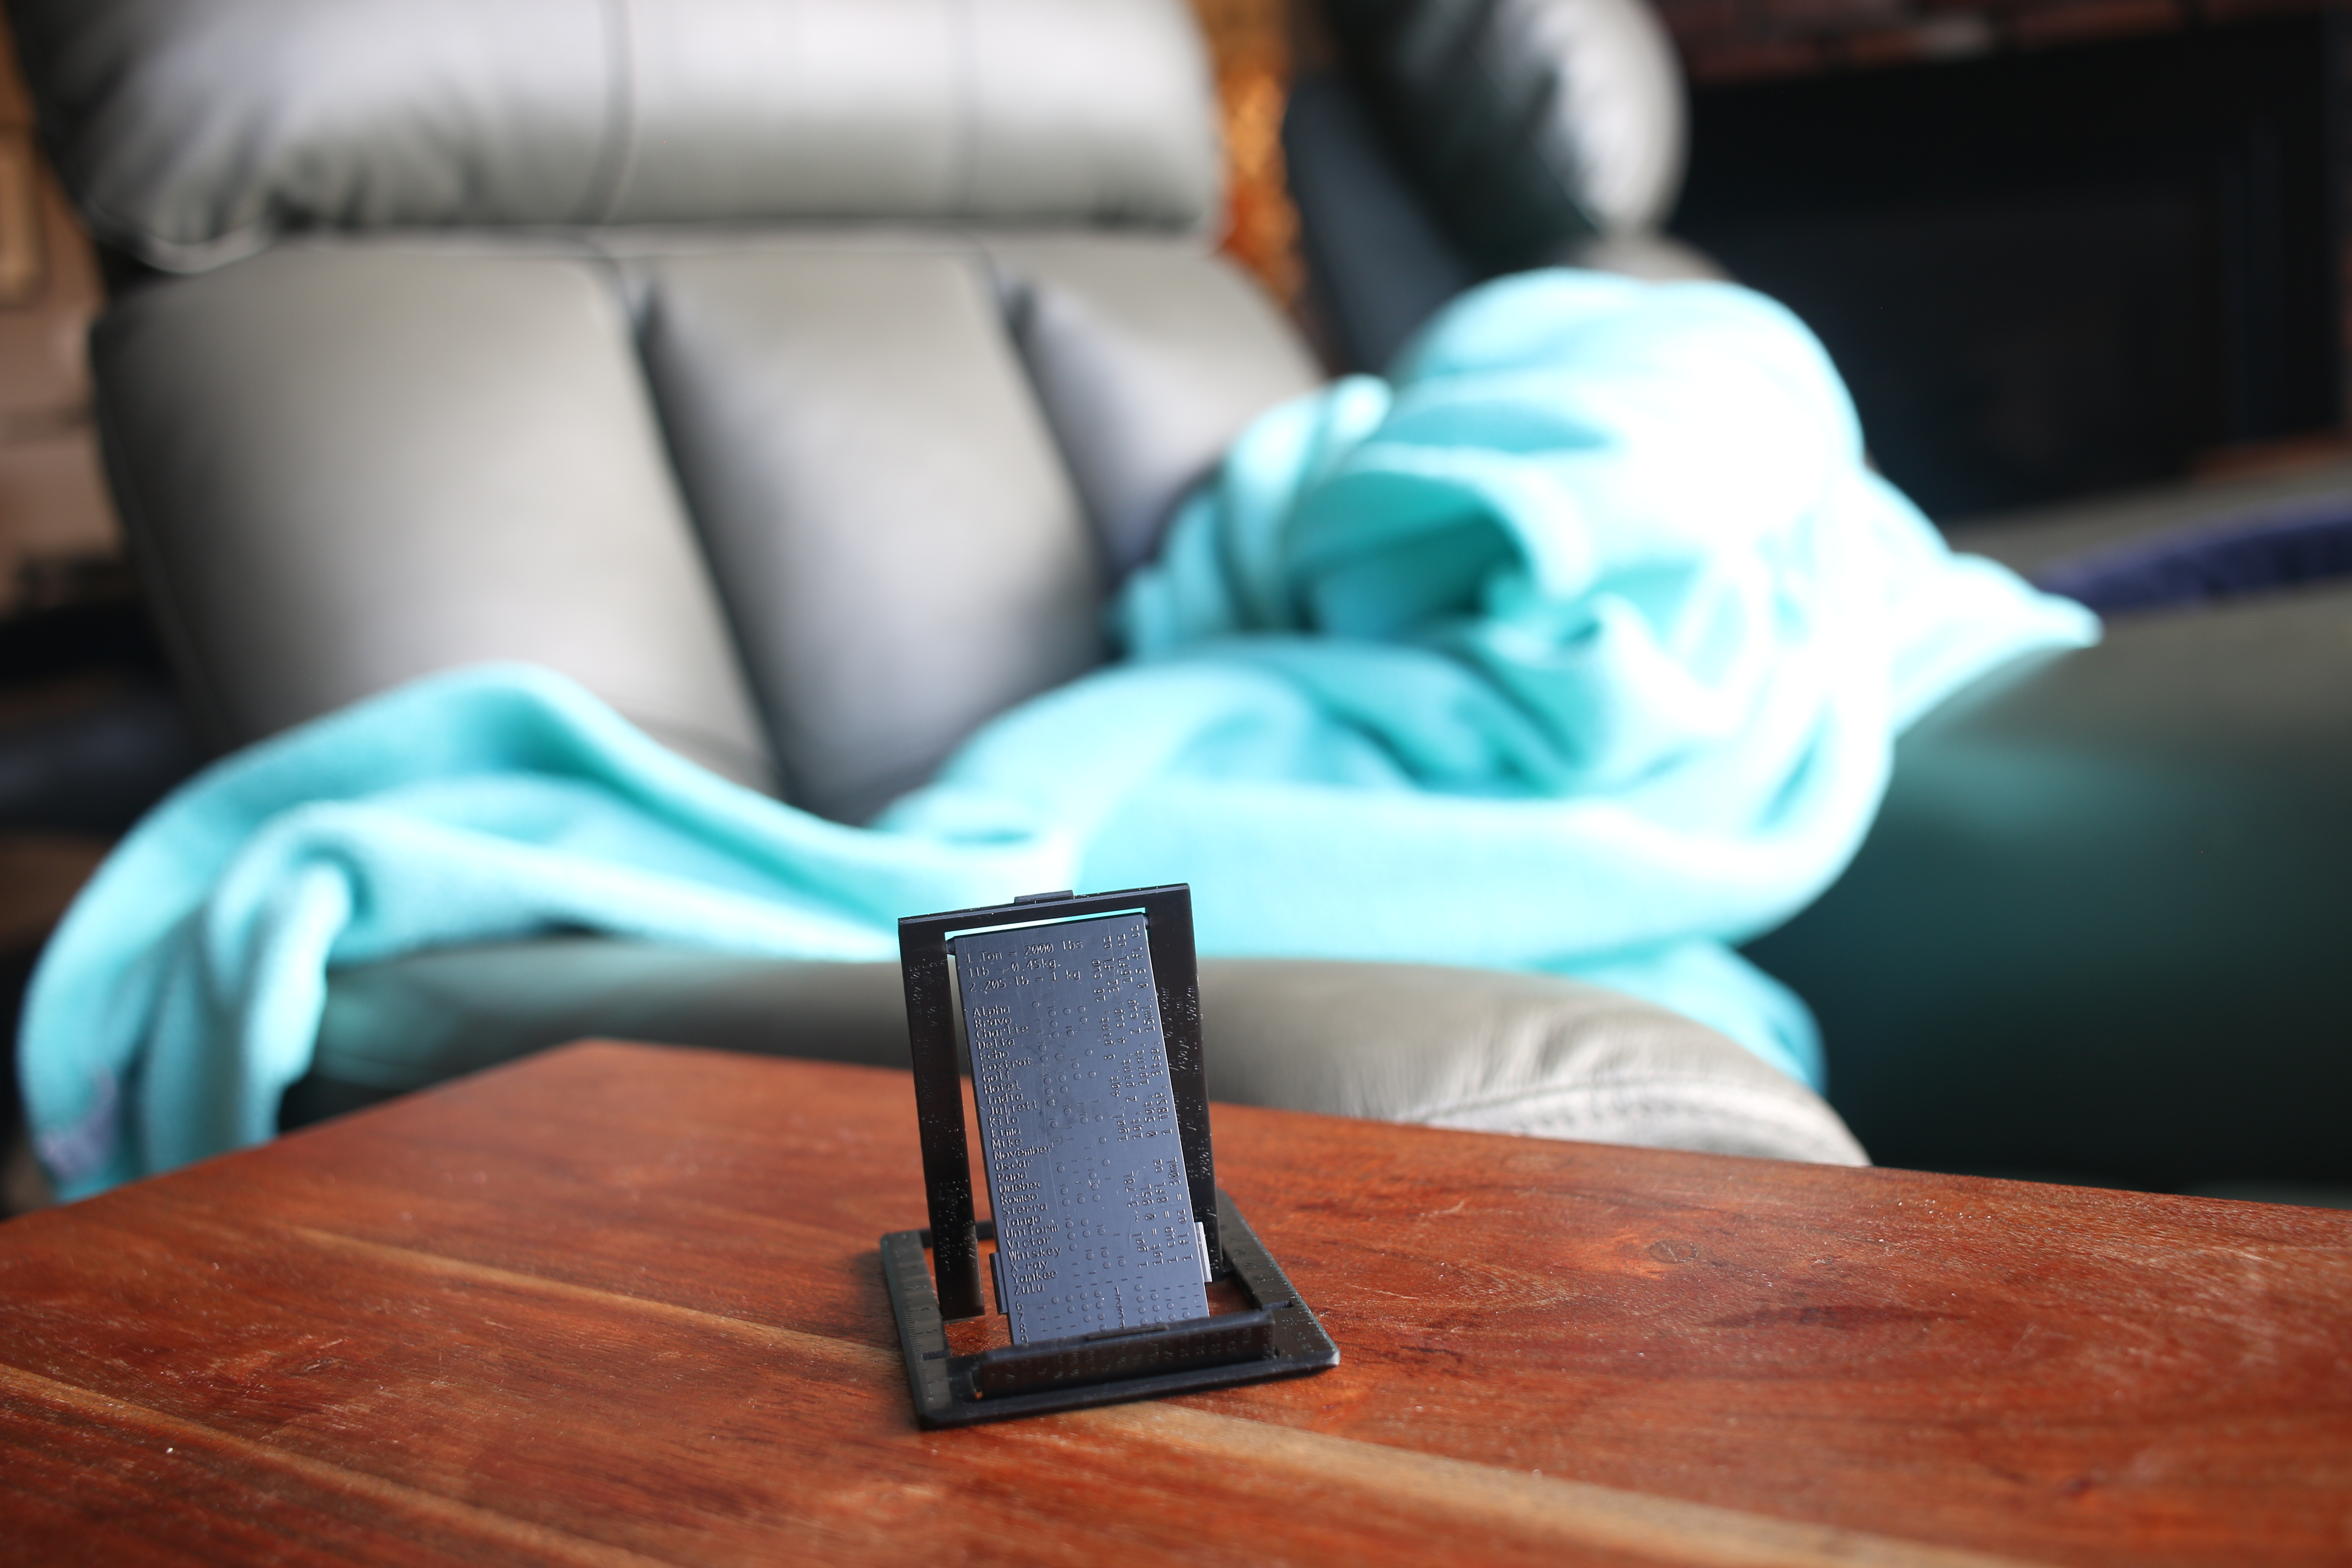 Wallet sized phone stand, WalletStand, on end table.